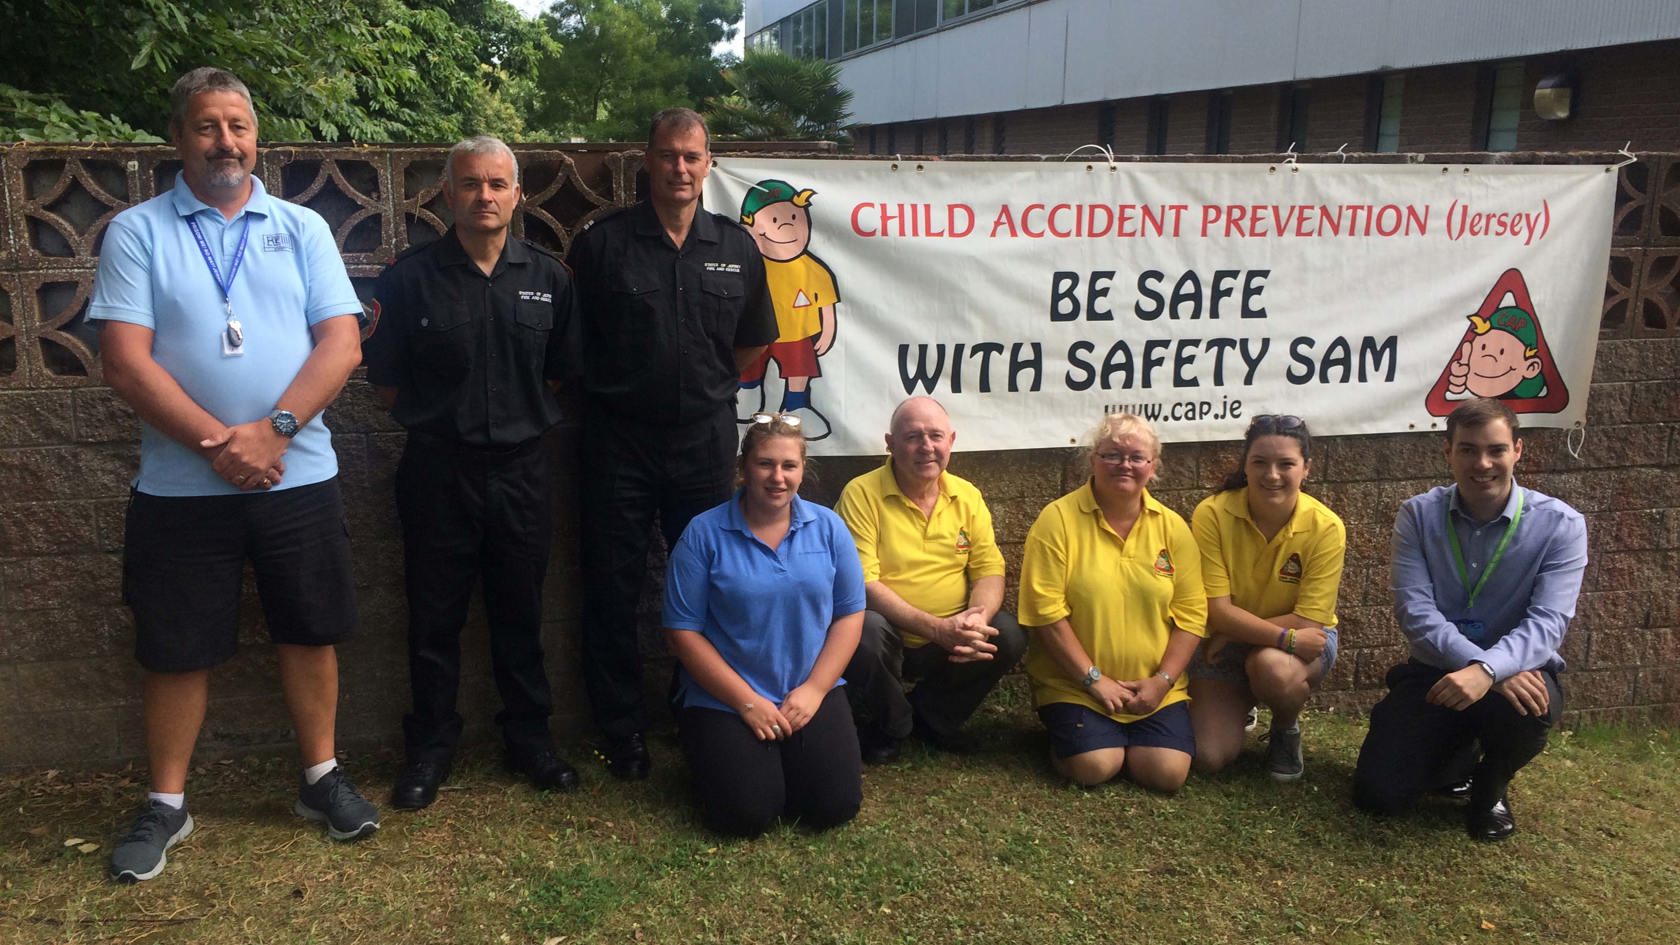 Child Accident Prevention team members